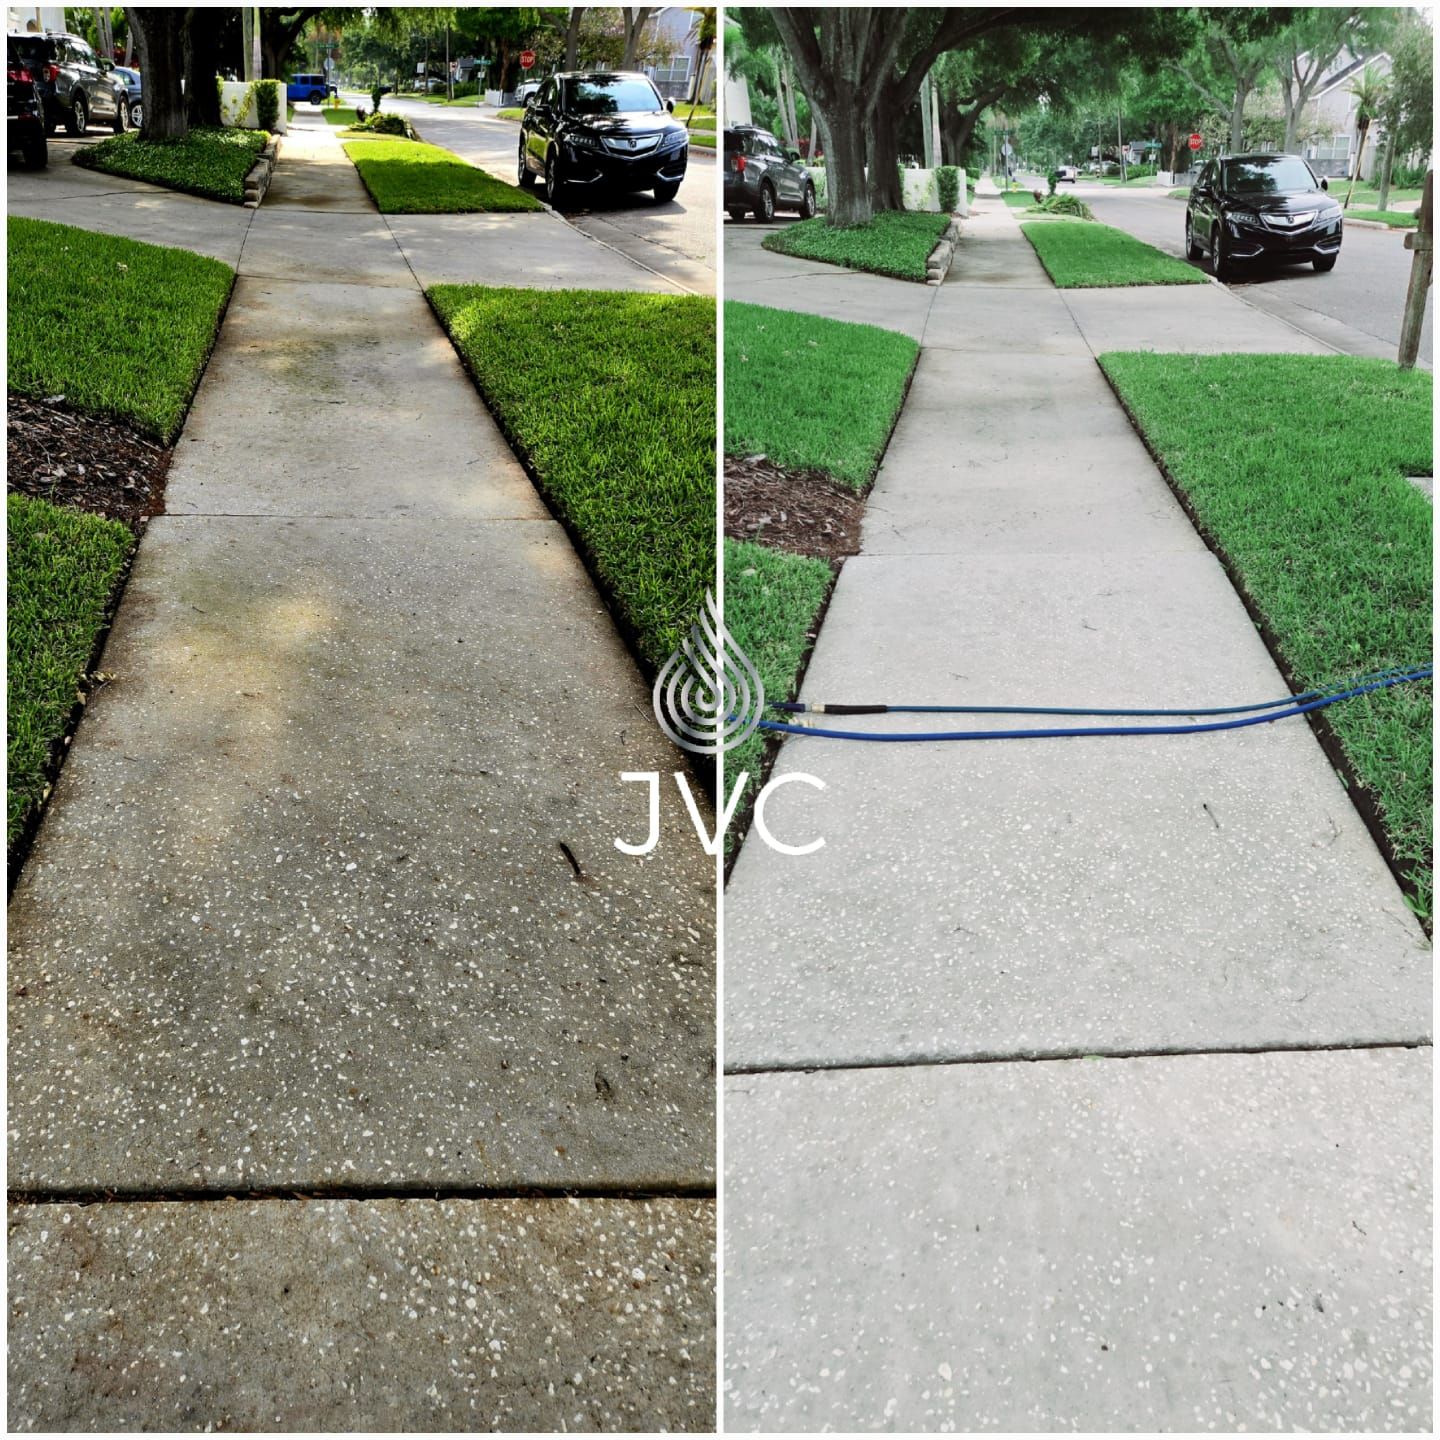 Commercial Pressure Washing for JVC Pressure Washing Services in Tampa, FL